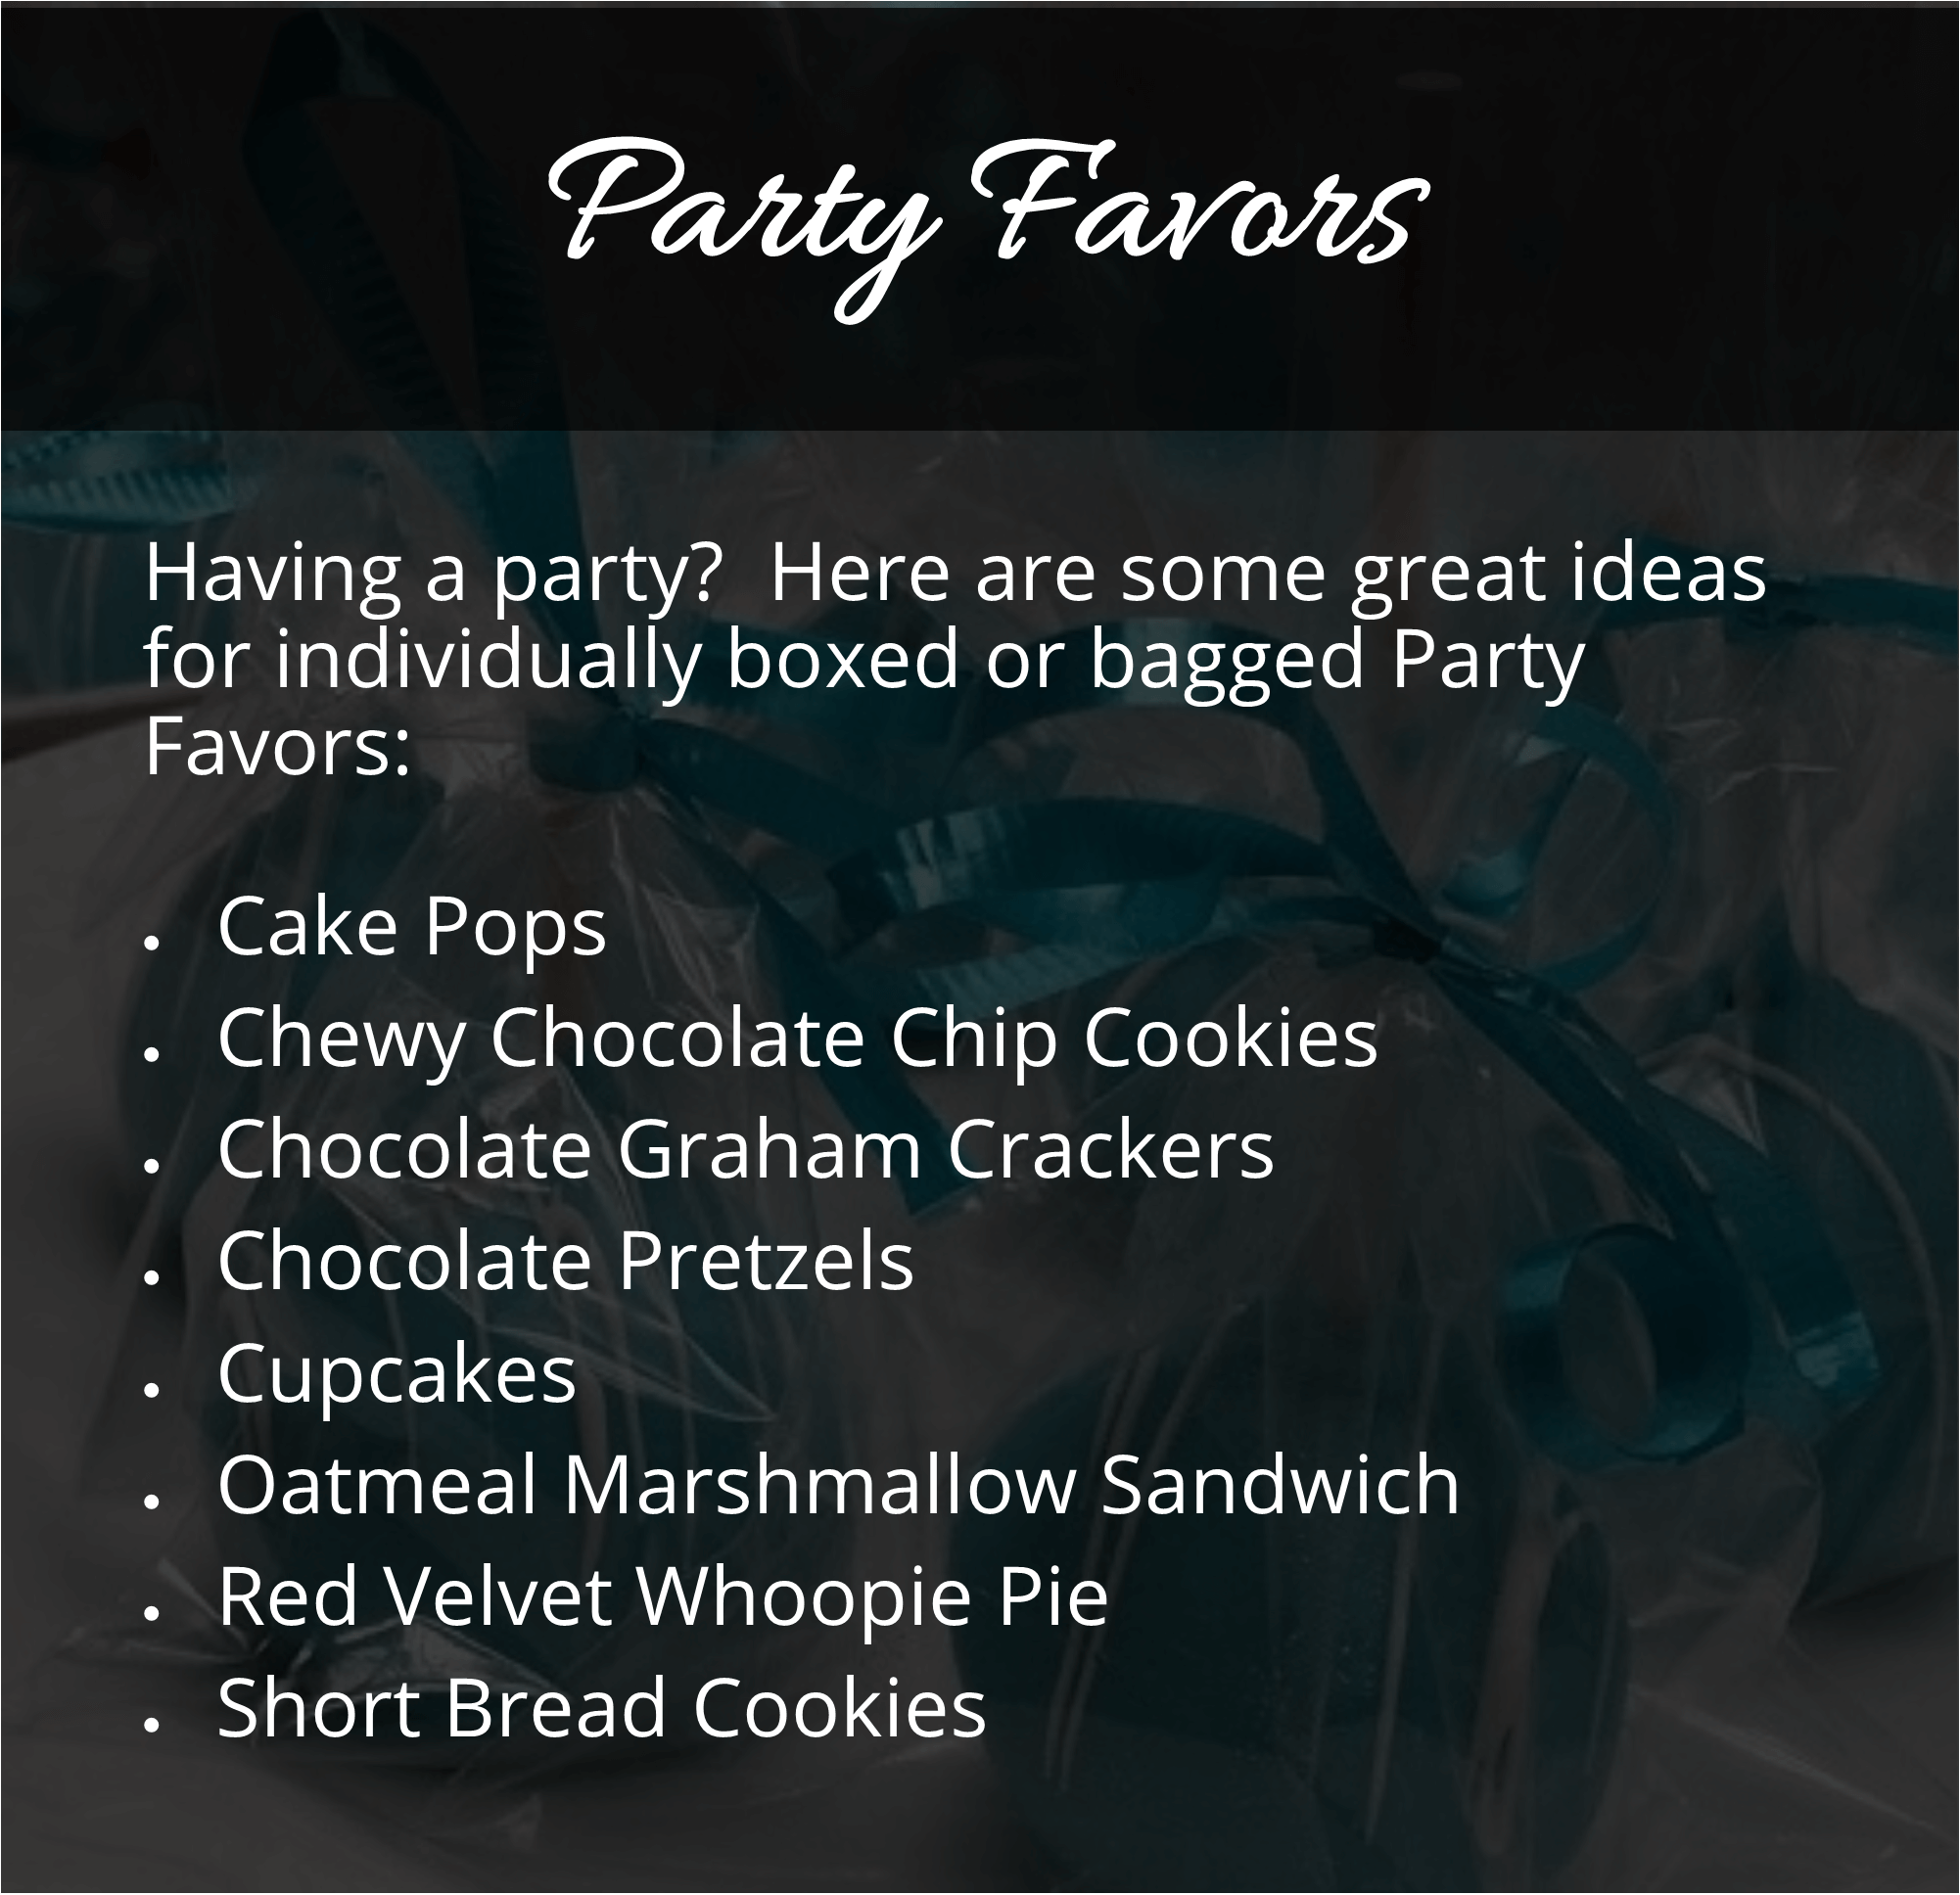 Catering_Menus - Party-Favors-text.png